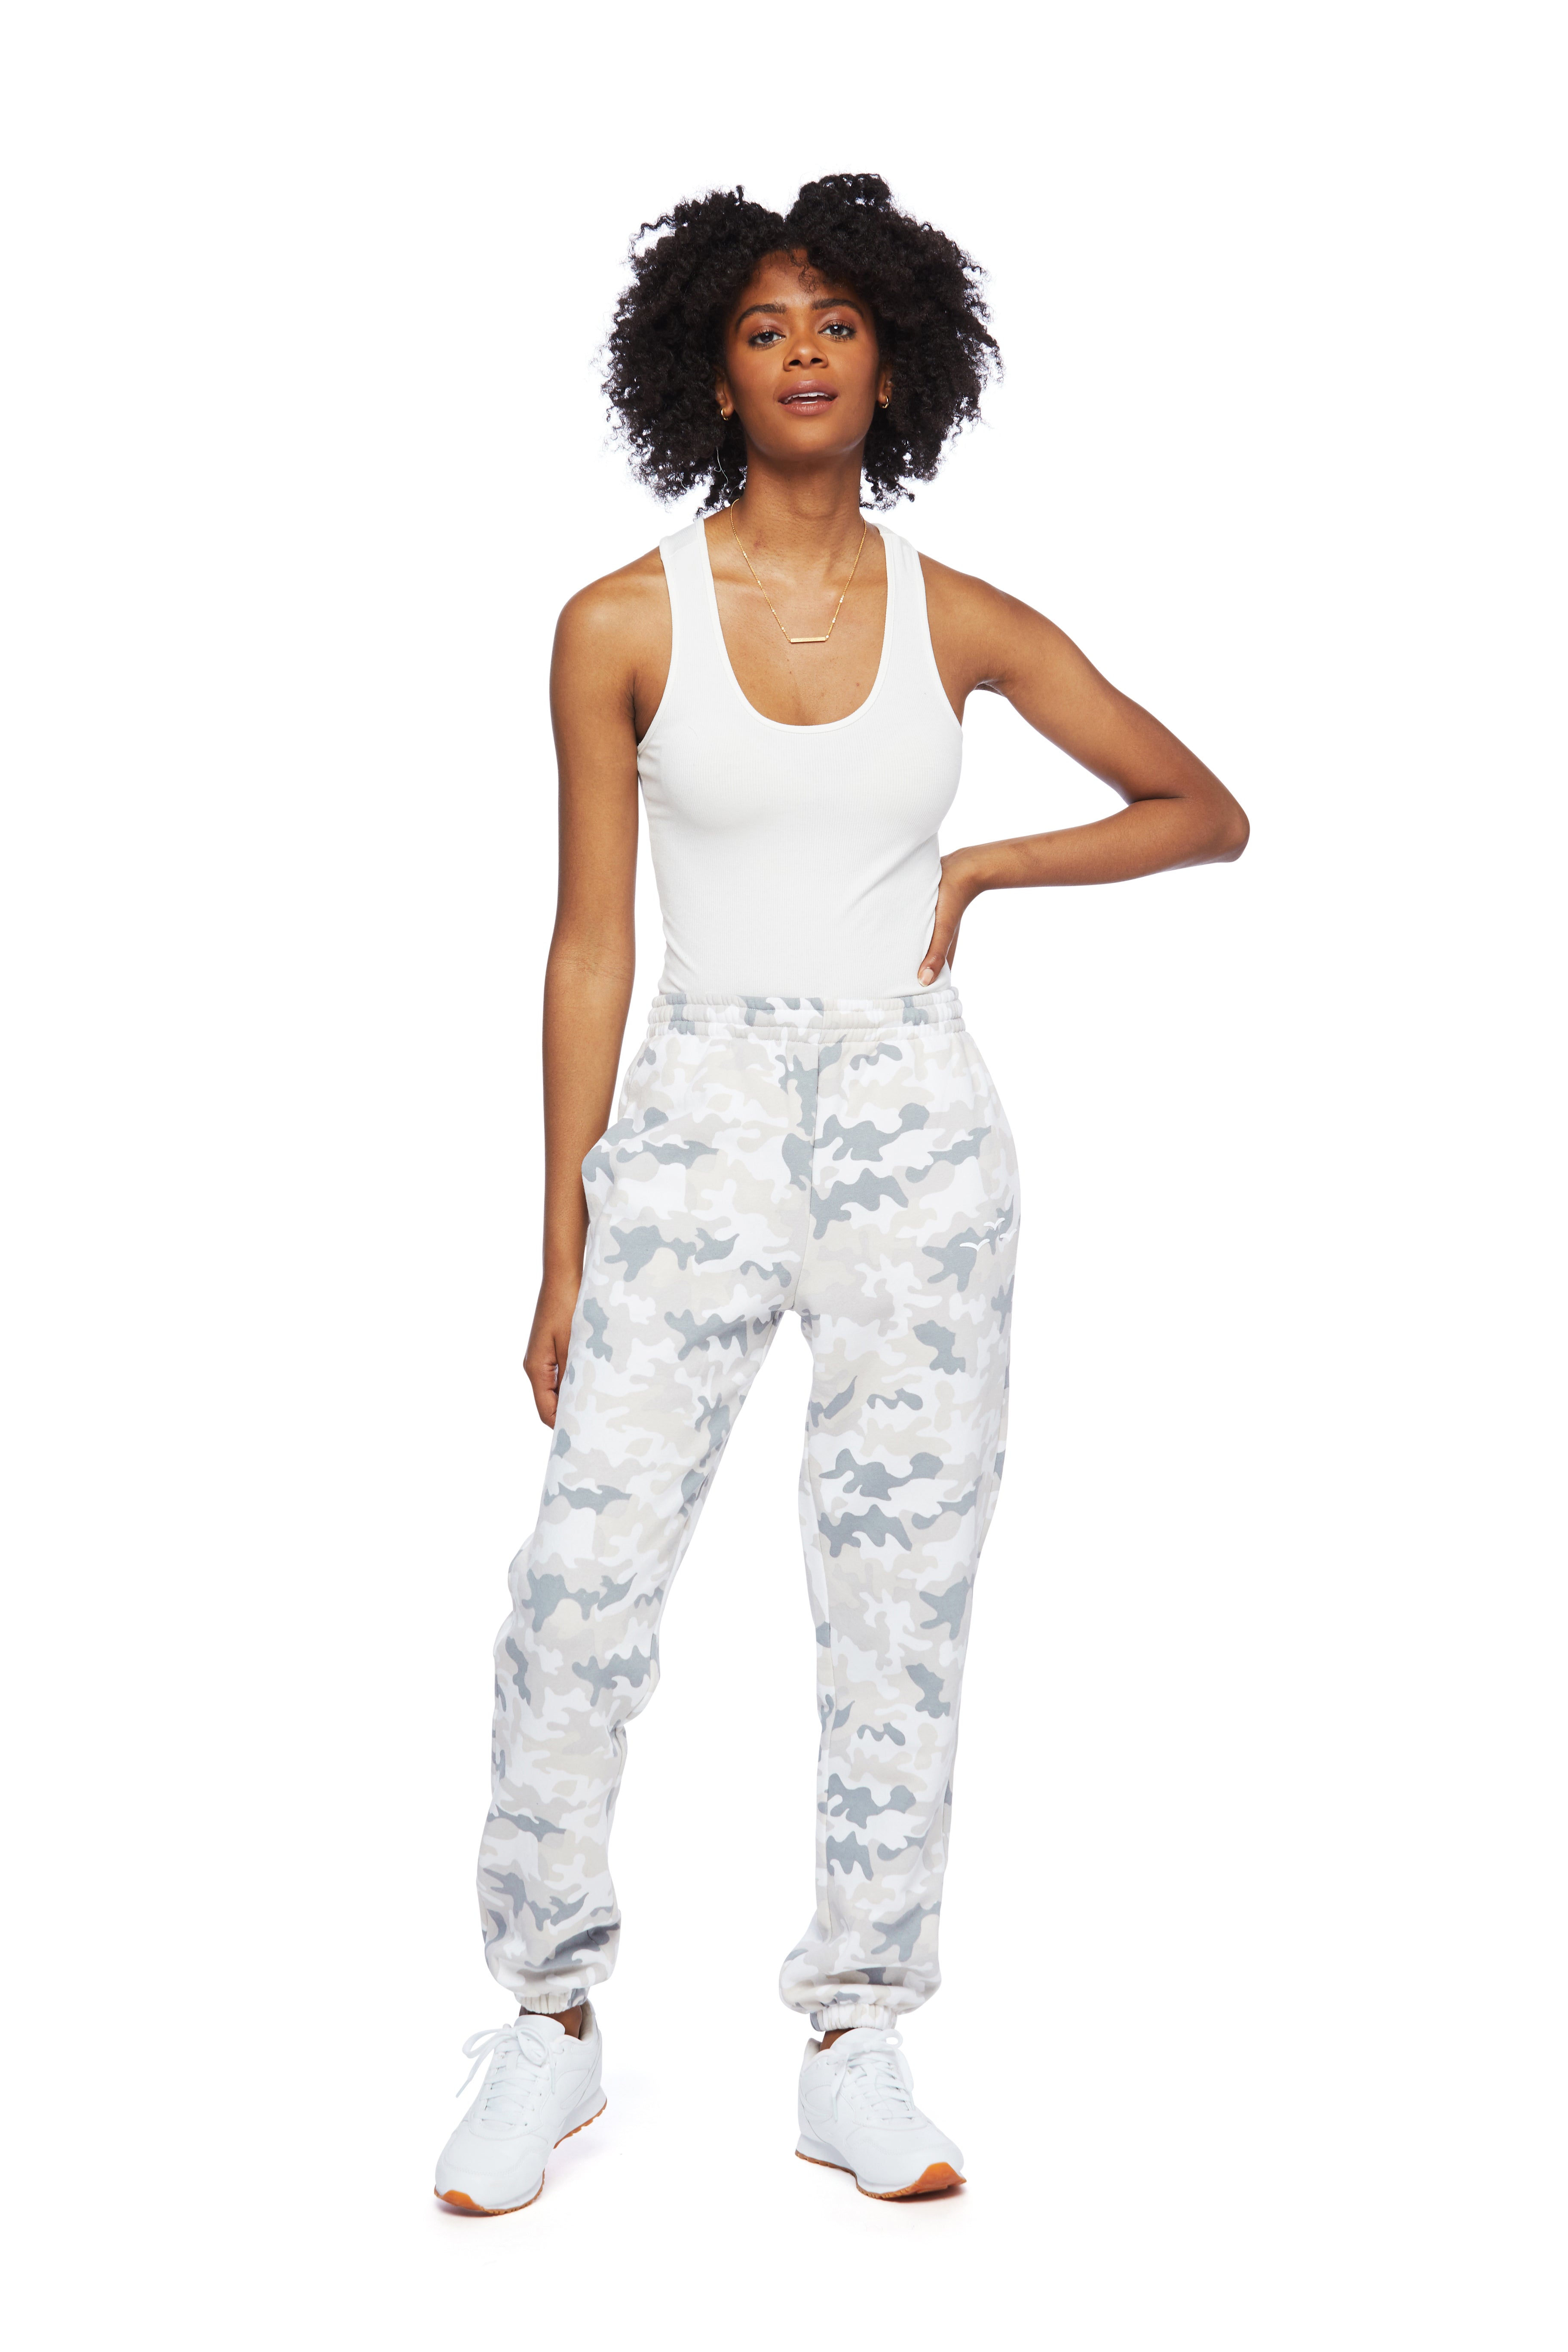 Nova Boyfriend Jogger in White Camo from Lazypants - always a great buy at a reasonable price.